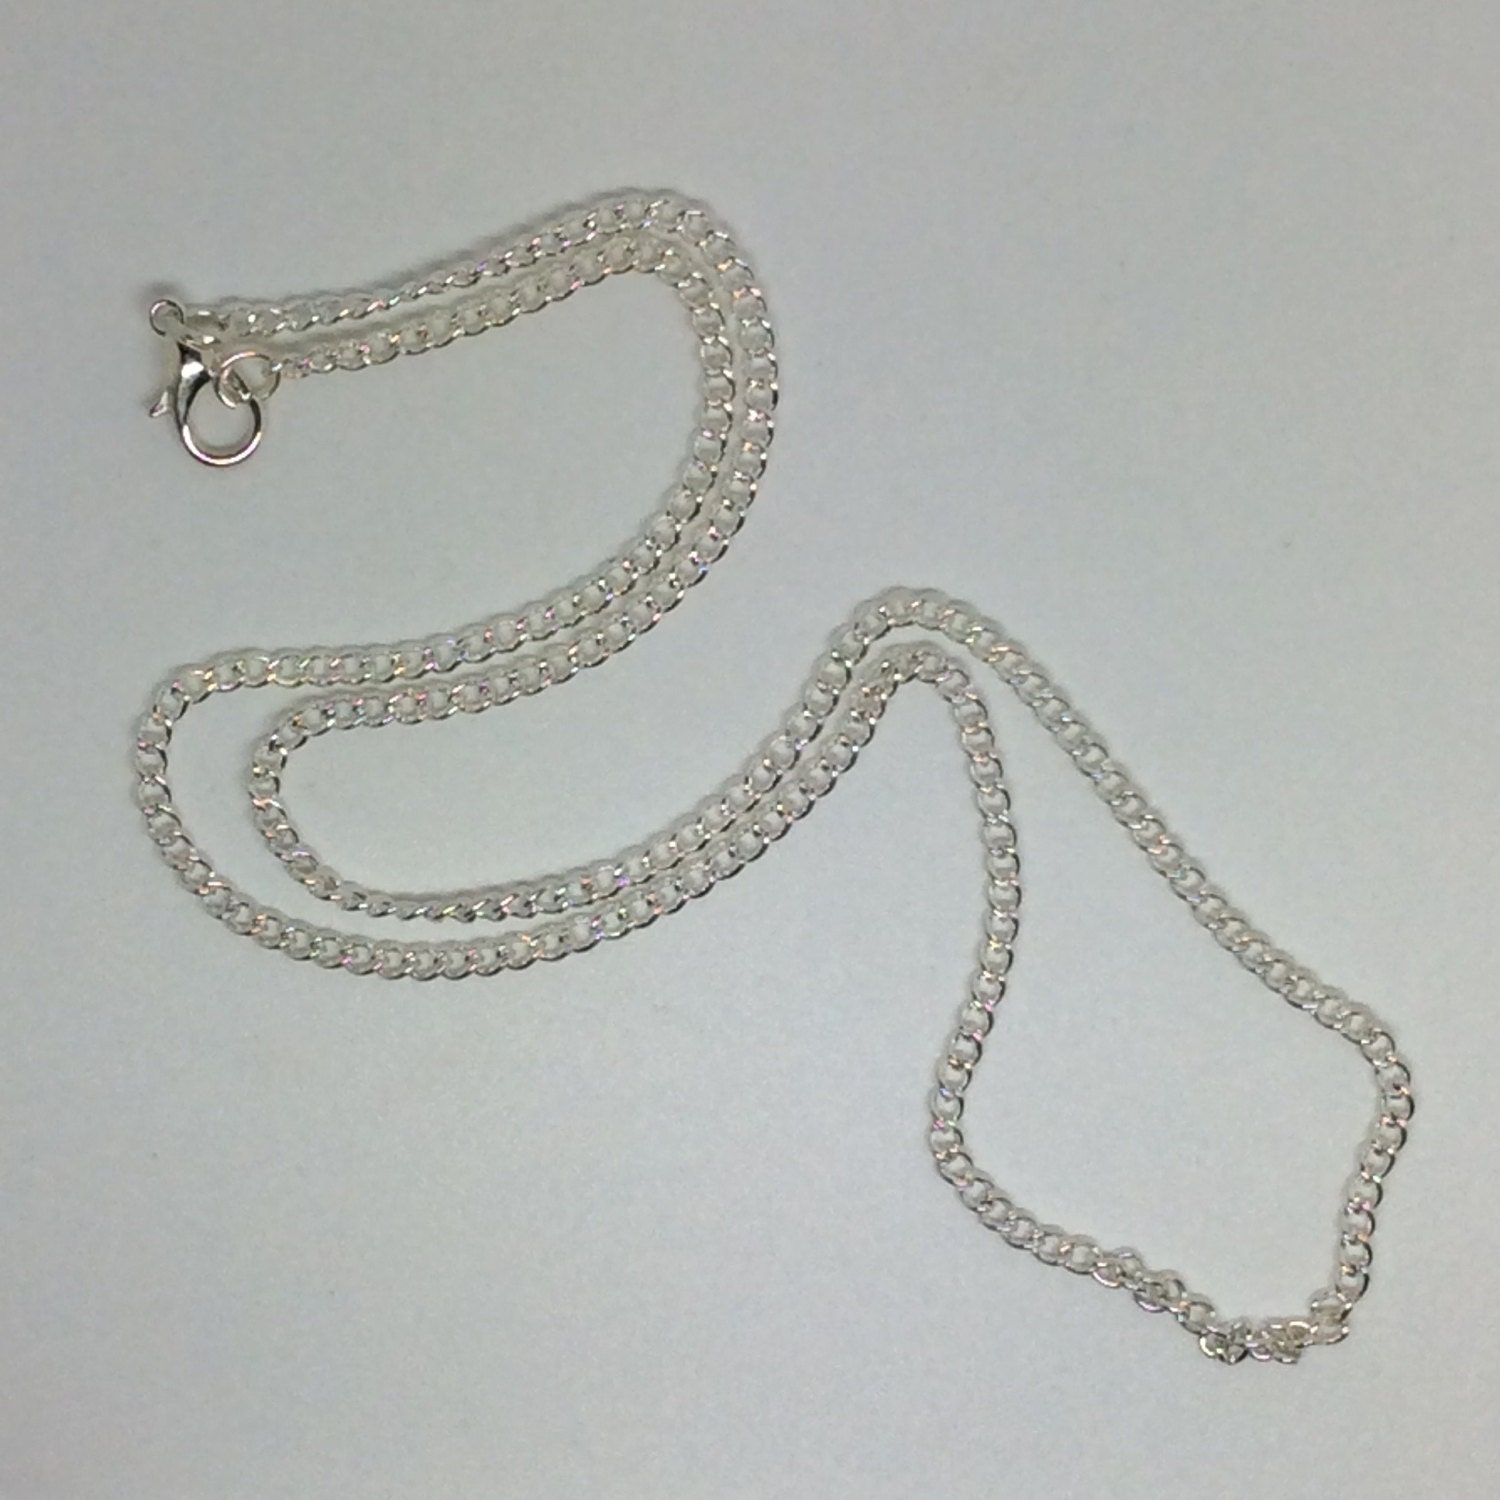 2 Link Curb Chain Necklace - 45 cm - Bright Silver Tone- Ref 072 from